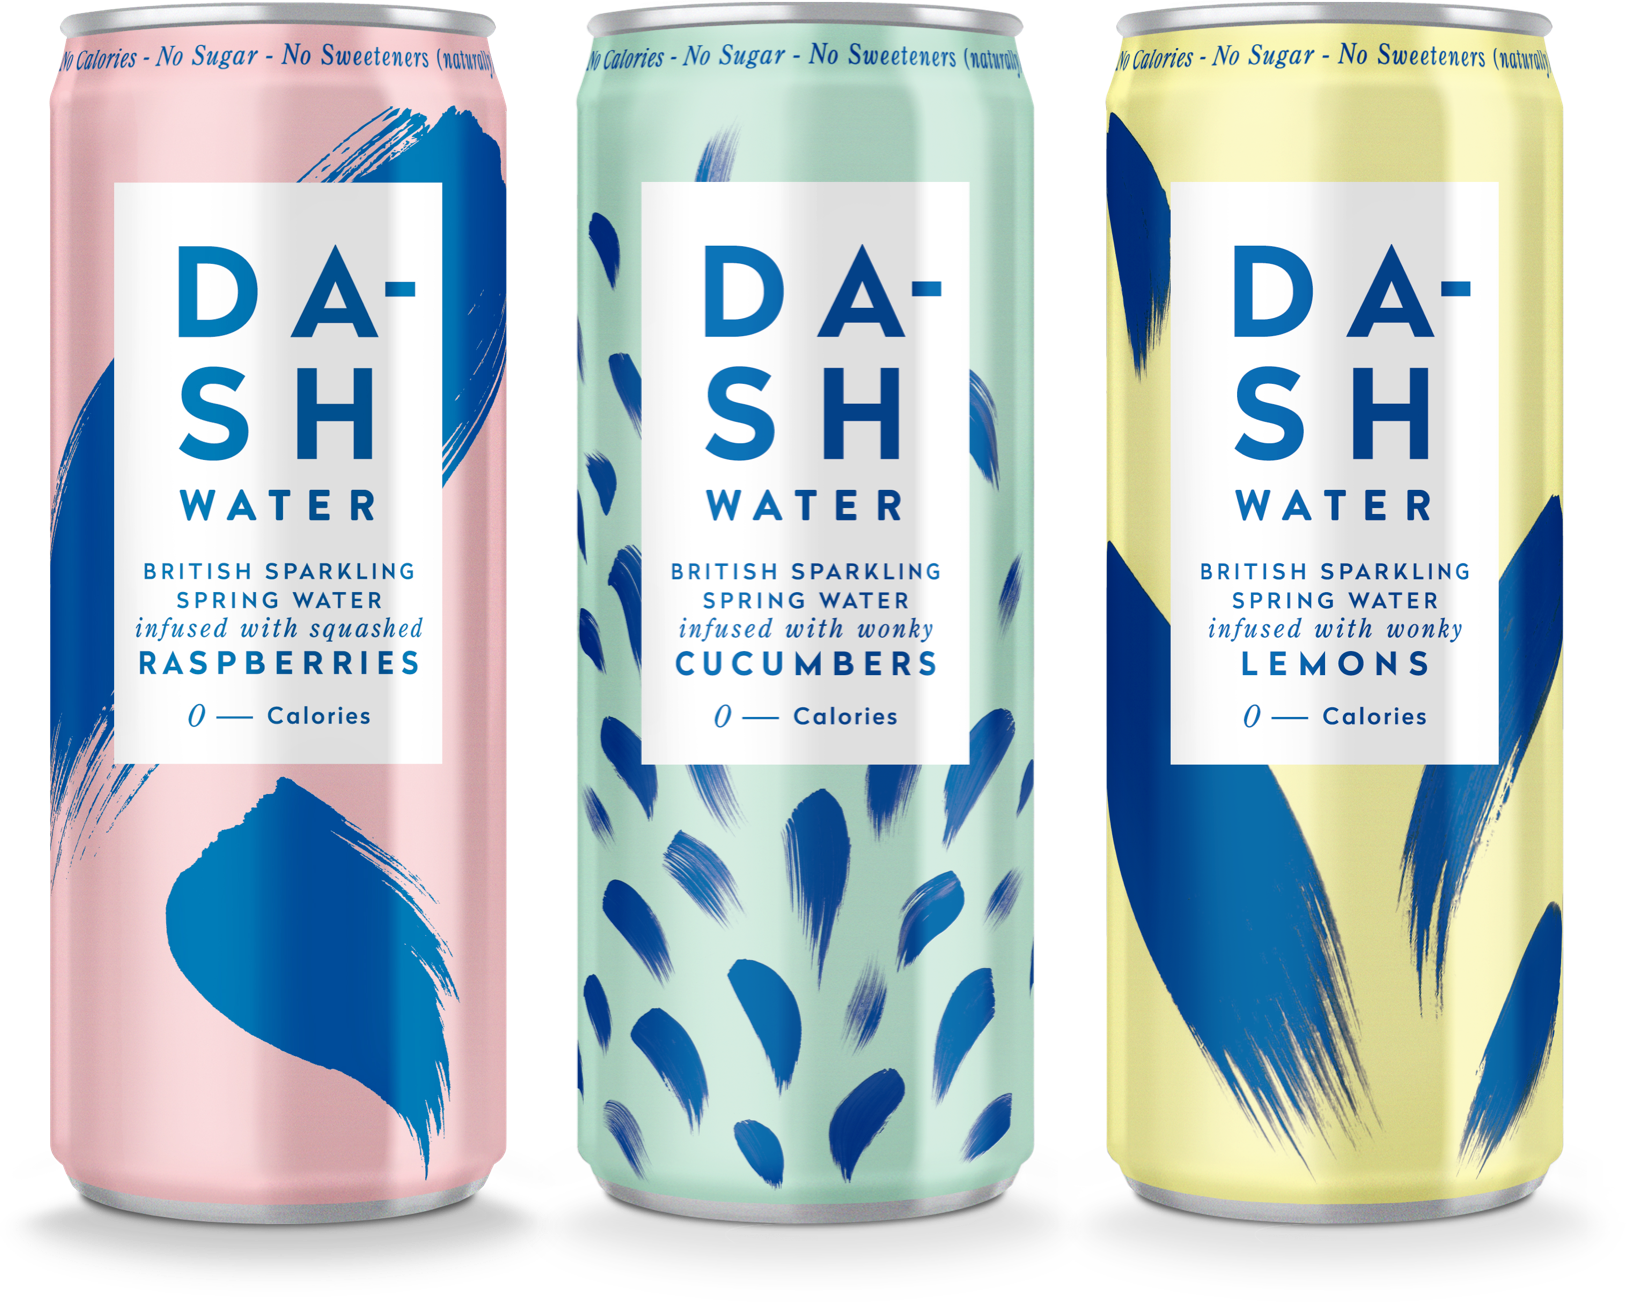 DA-SH Water Is The Perfect Summer Beverage